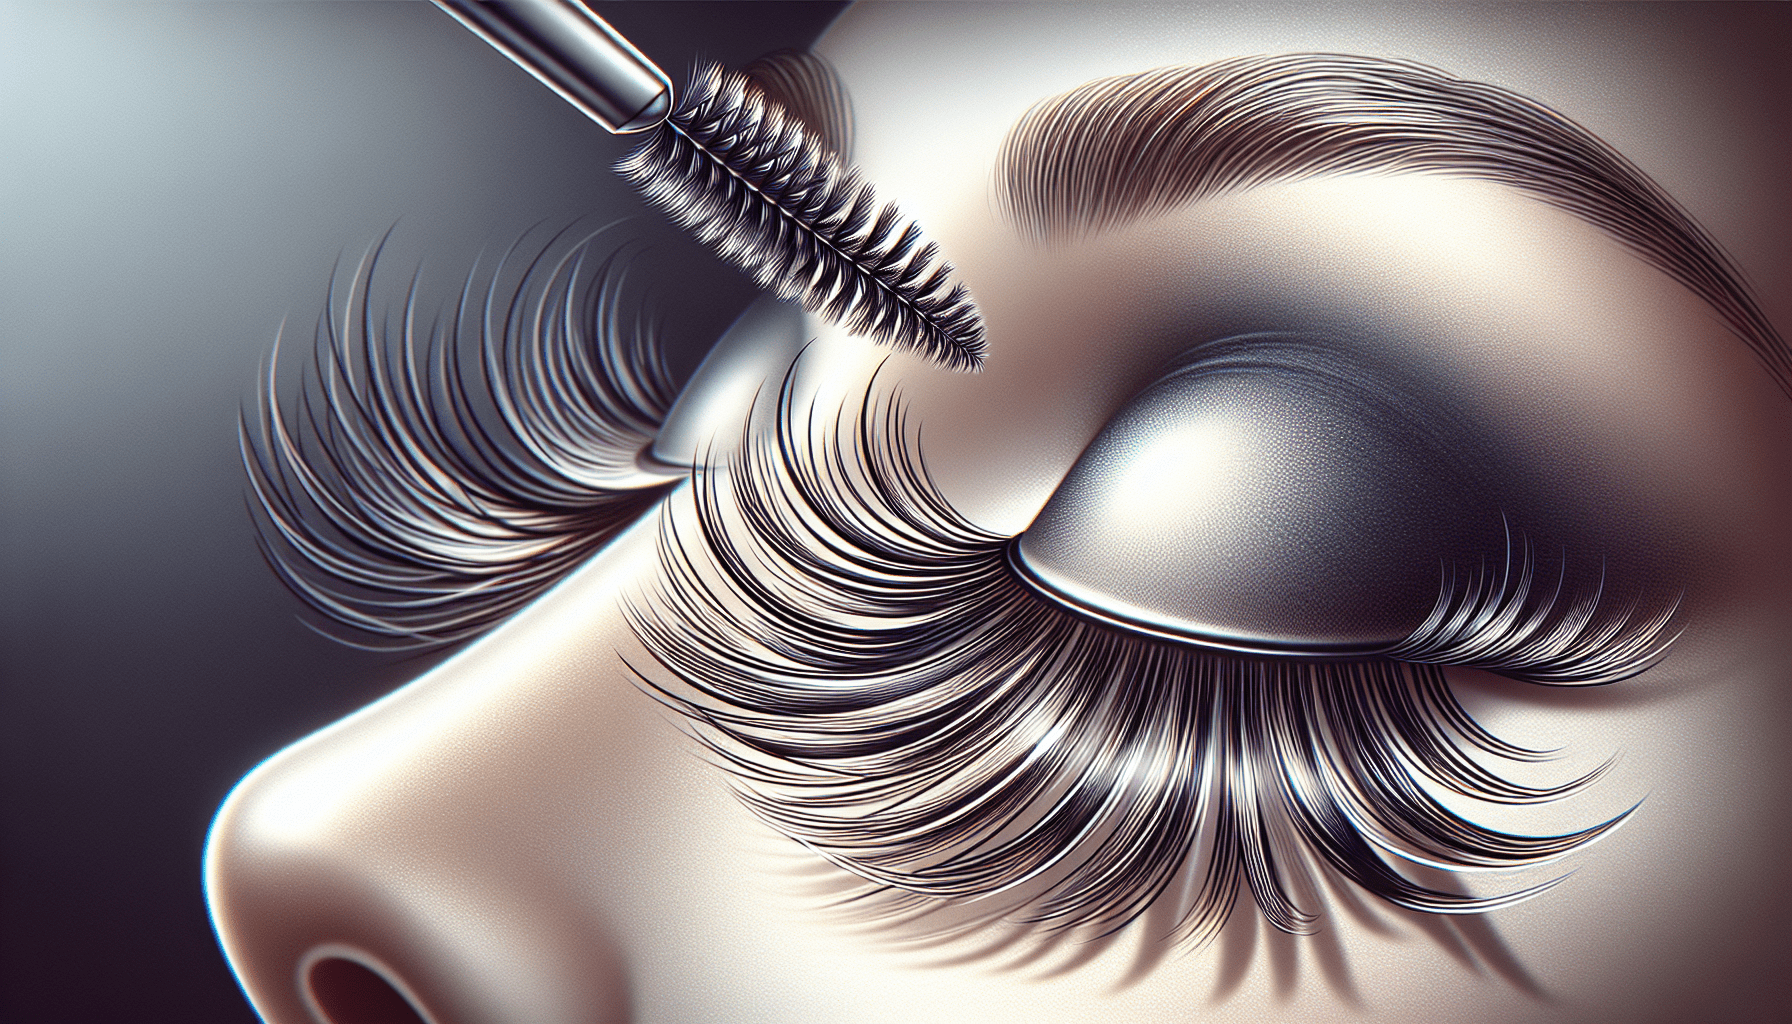 How Can I Prevent False Eyelashes From Losing Their Curl Over Time?